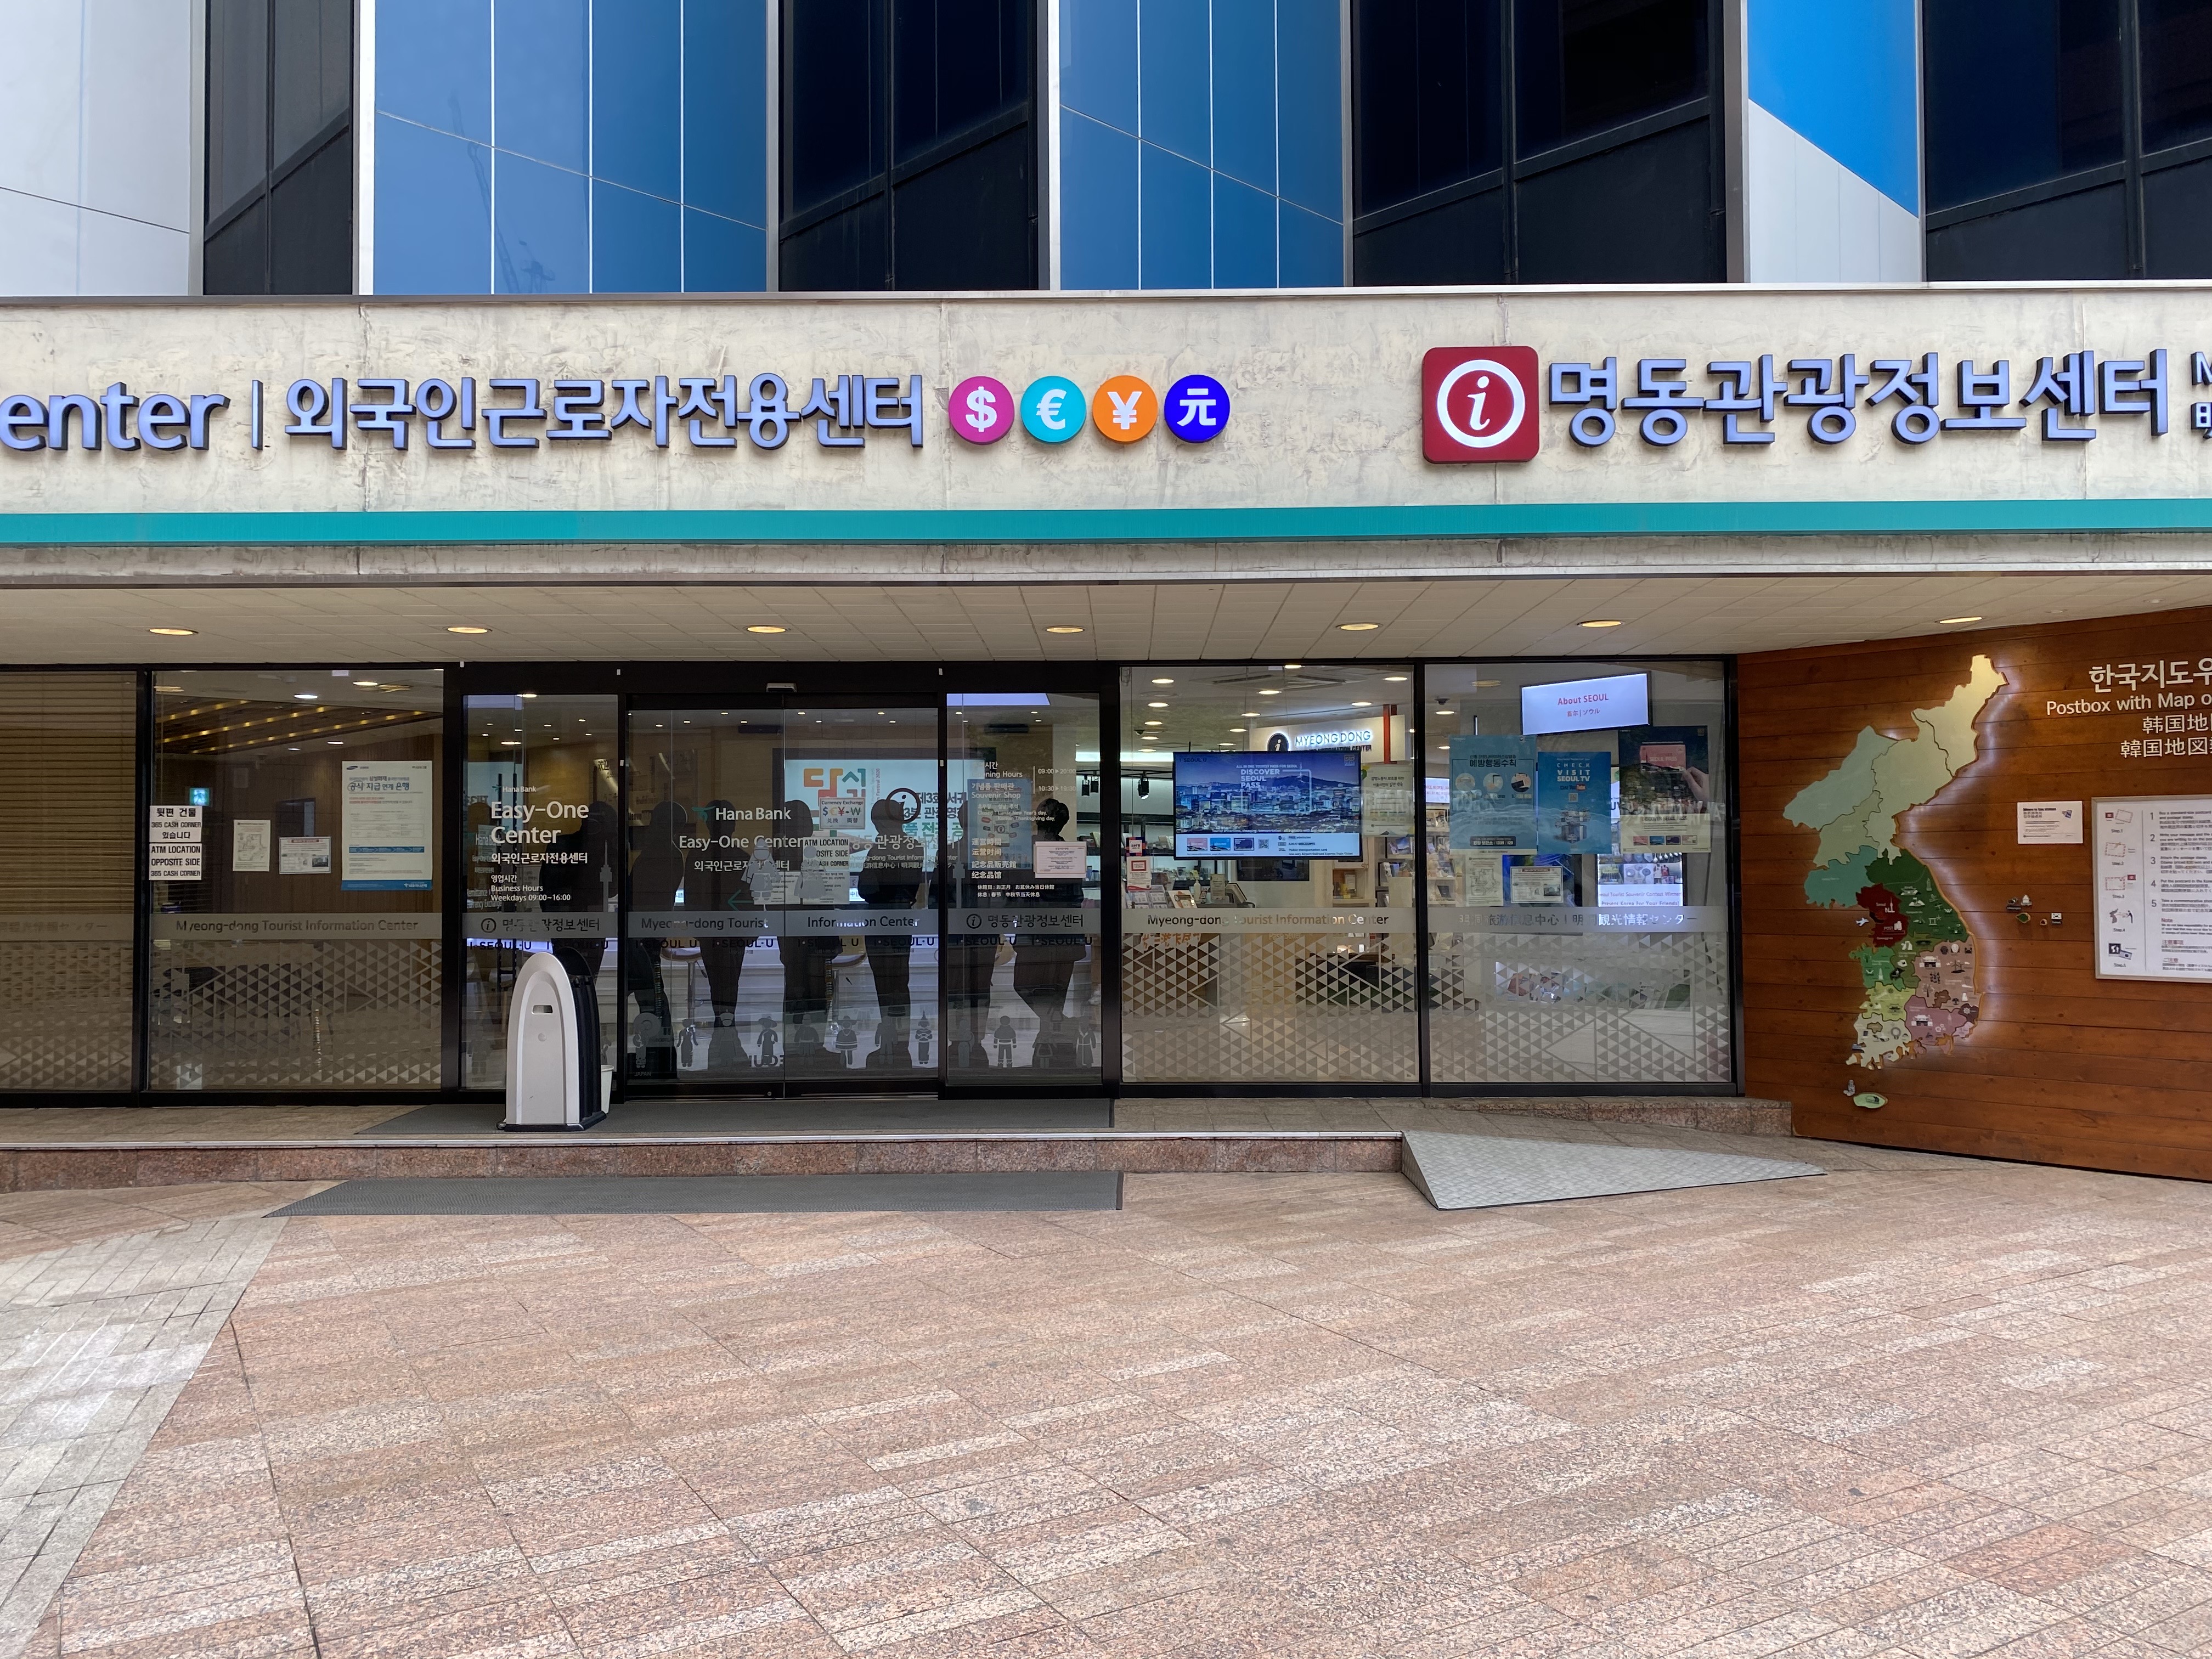 Myeongdong Tourist Information Center0 : Main entrance highly accessible with a wide width and flat floor